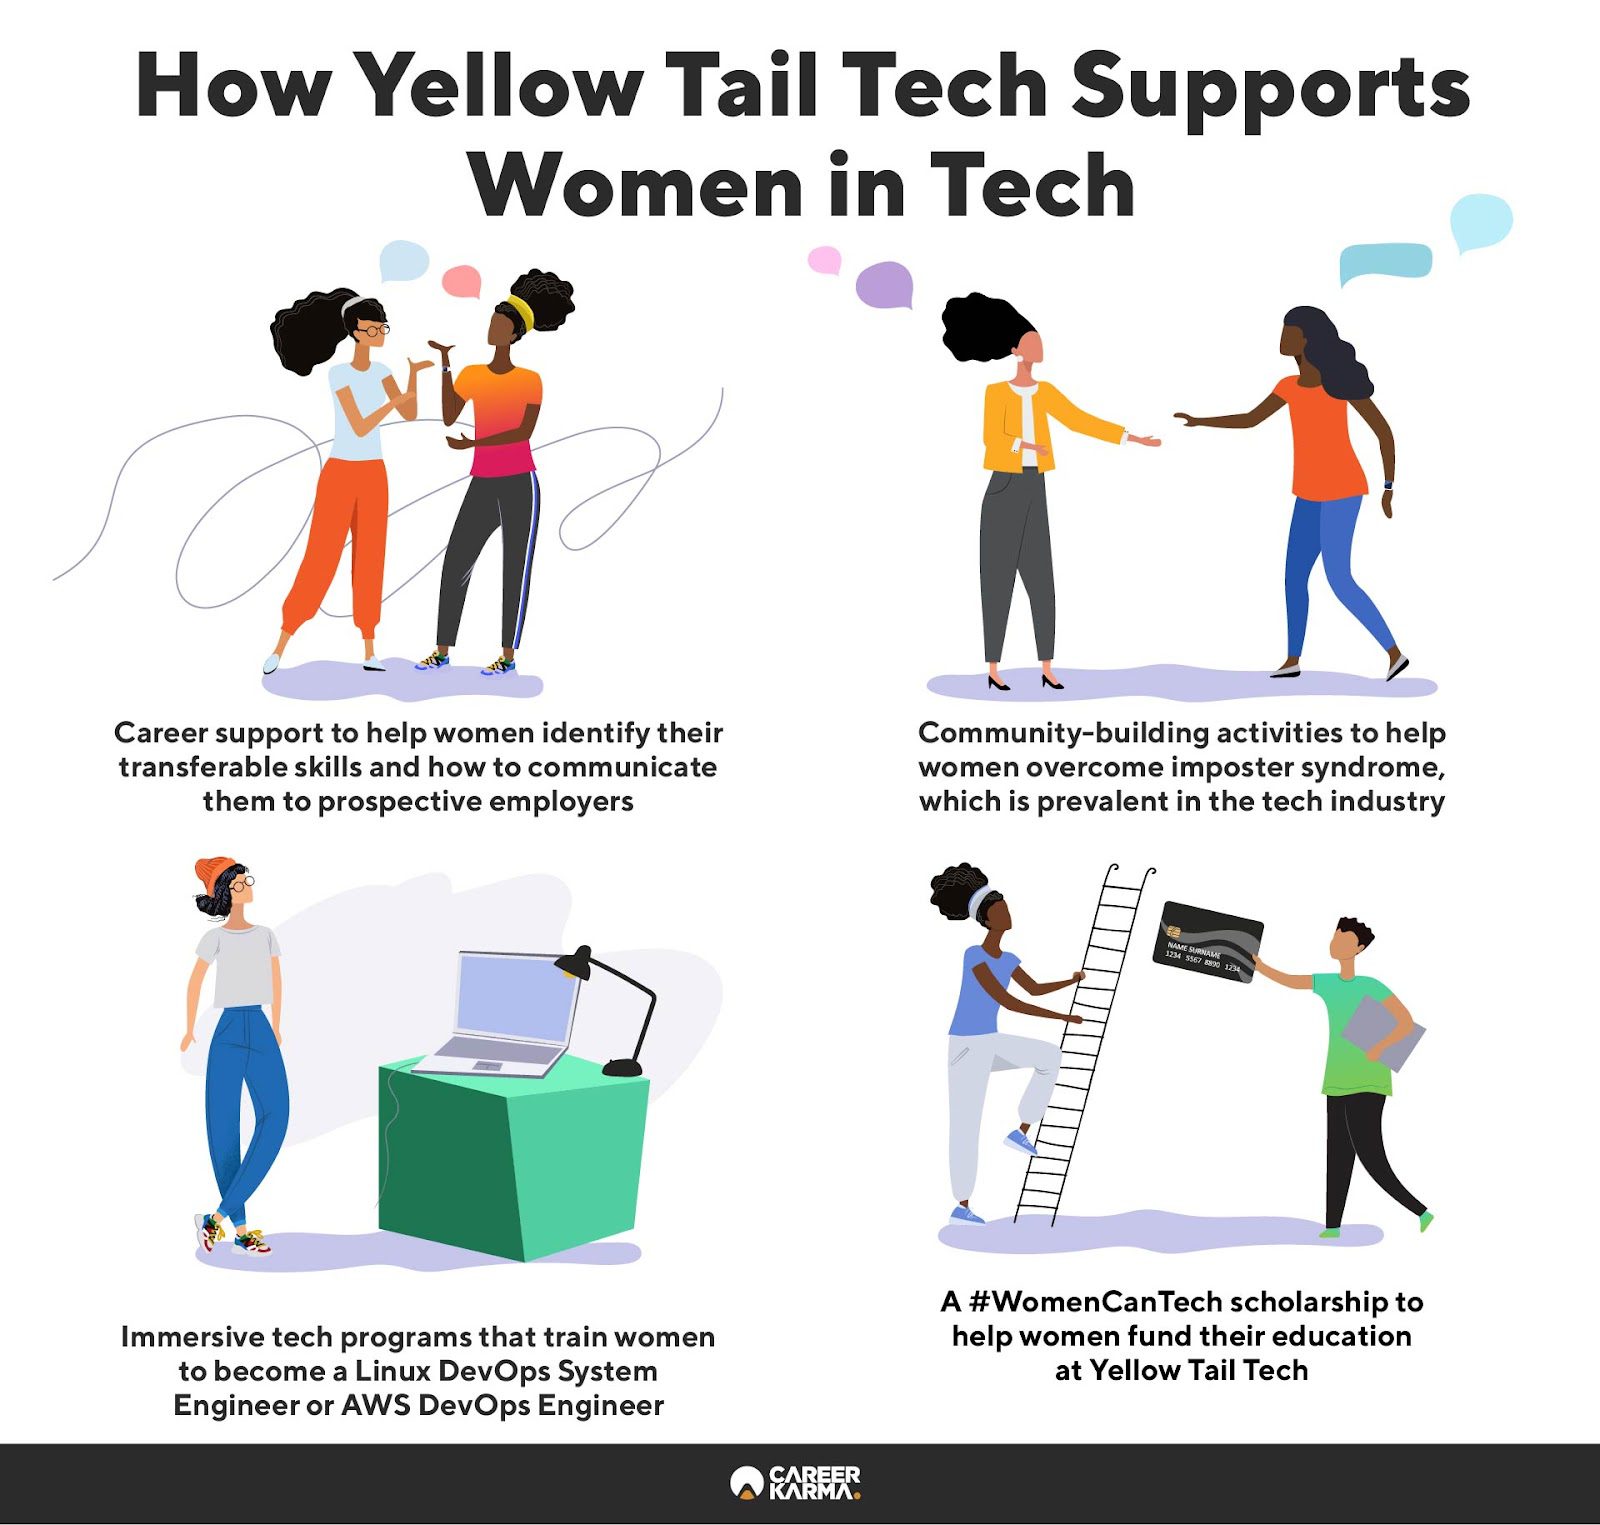 An infographic highlighting how Yellow Tail Tech supports women in tech